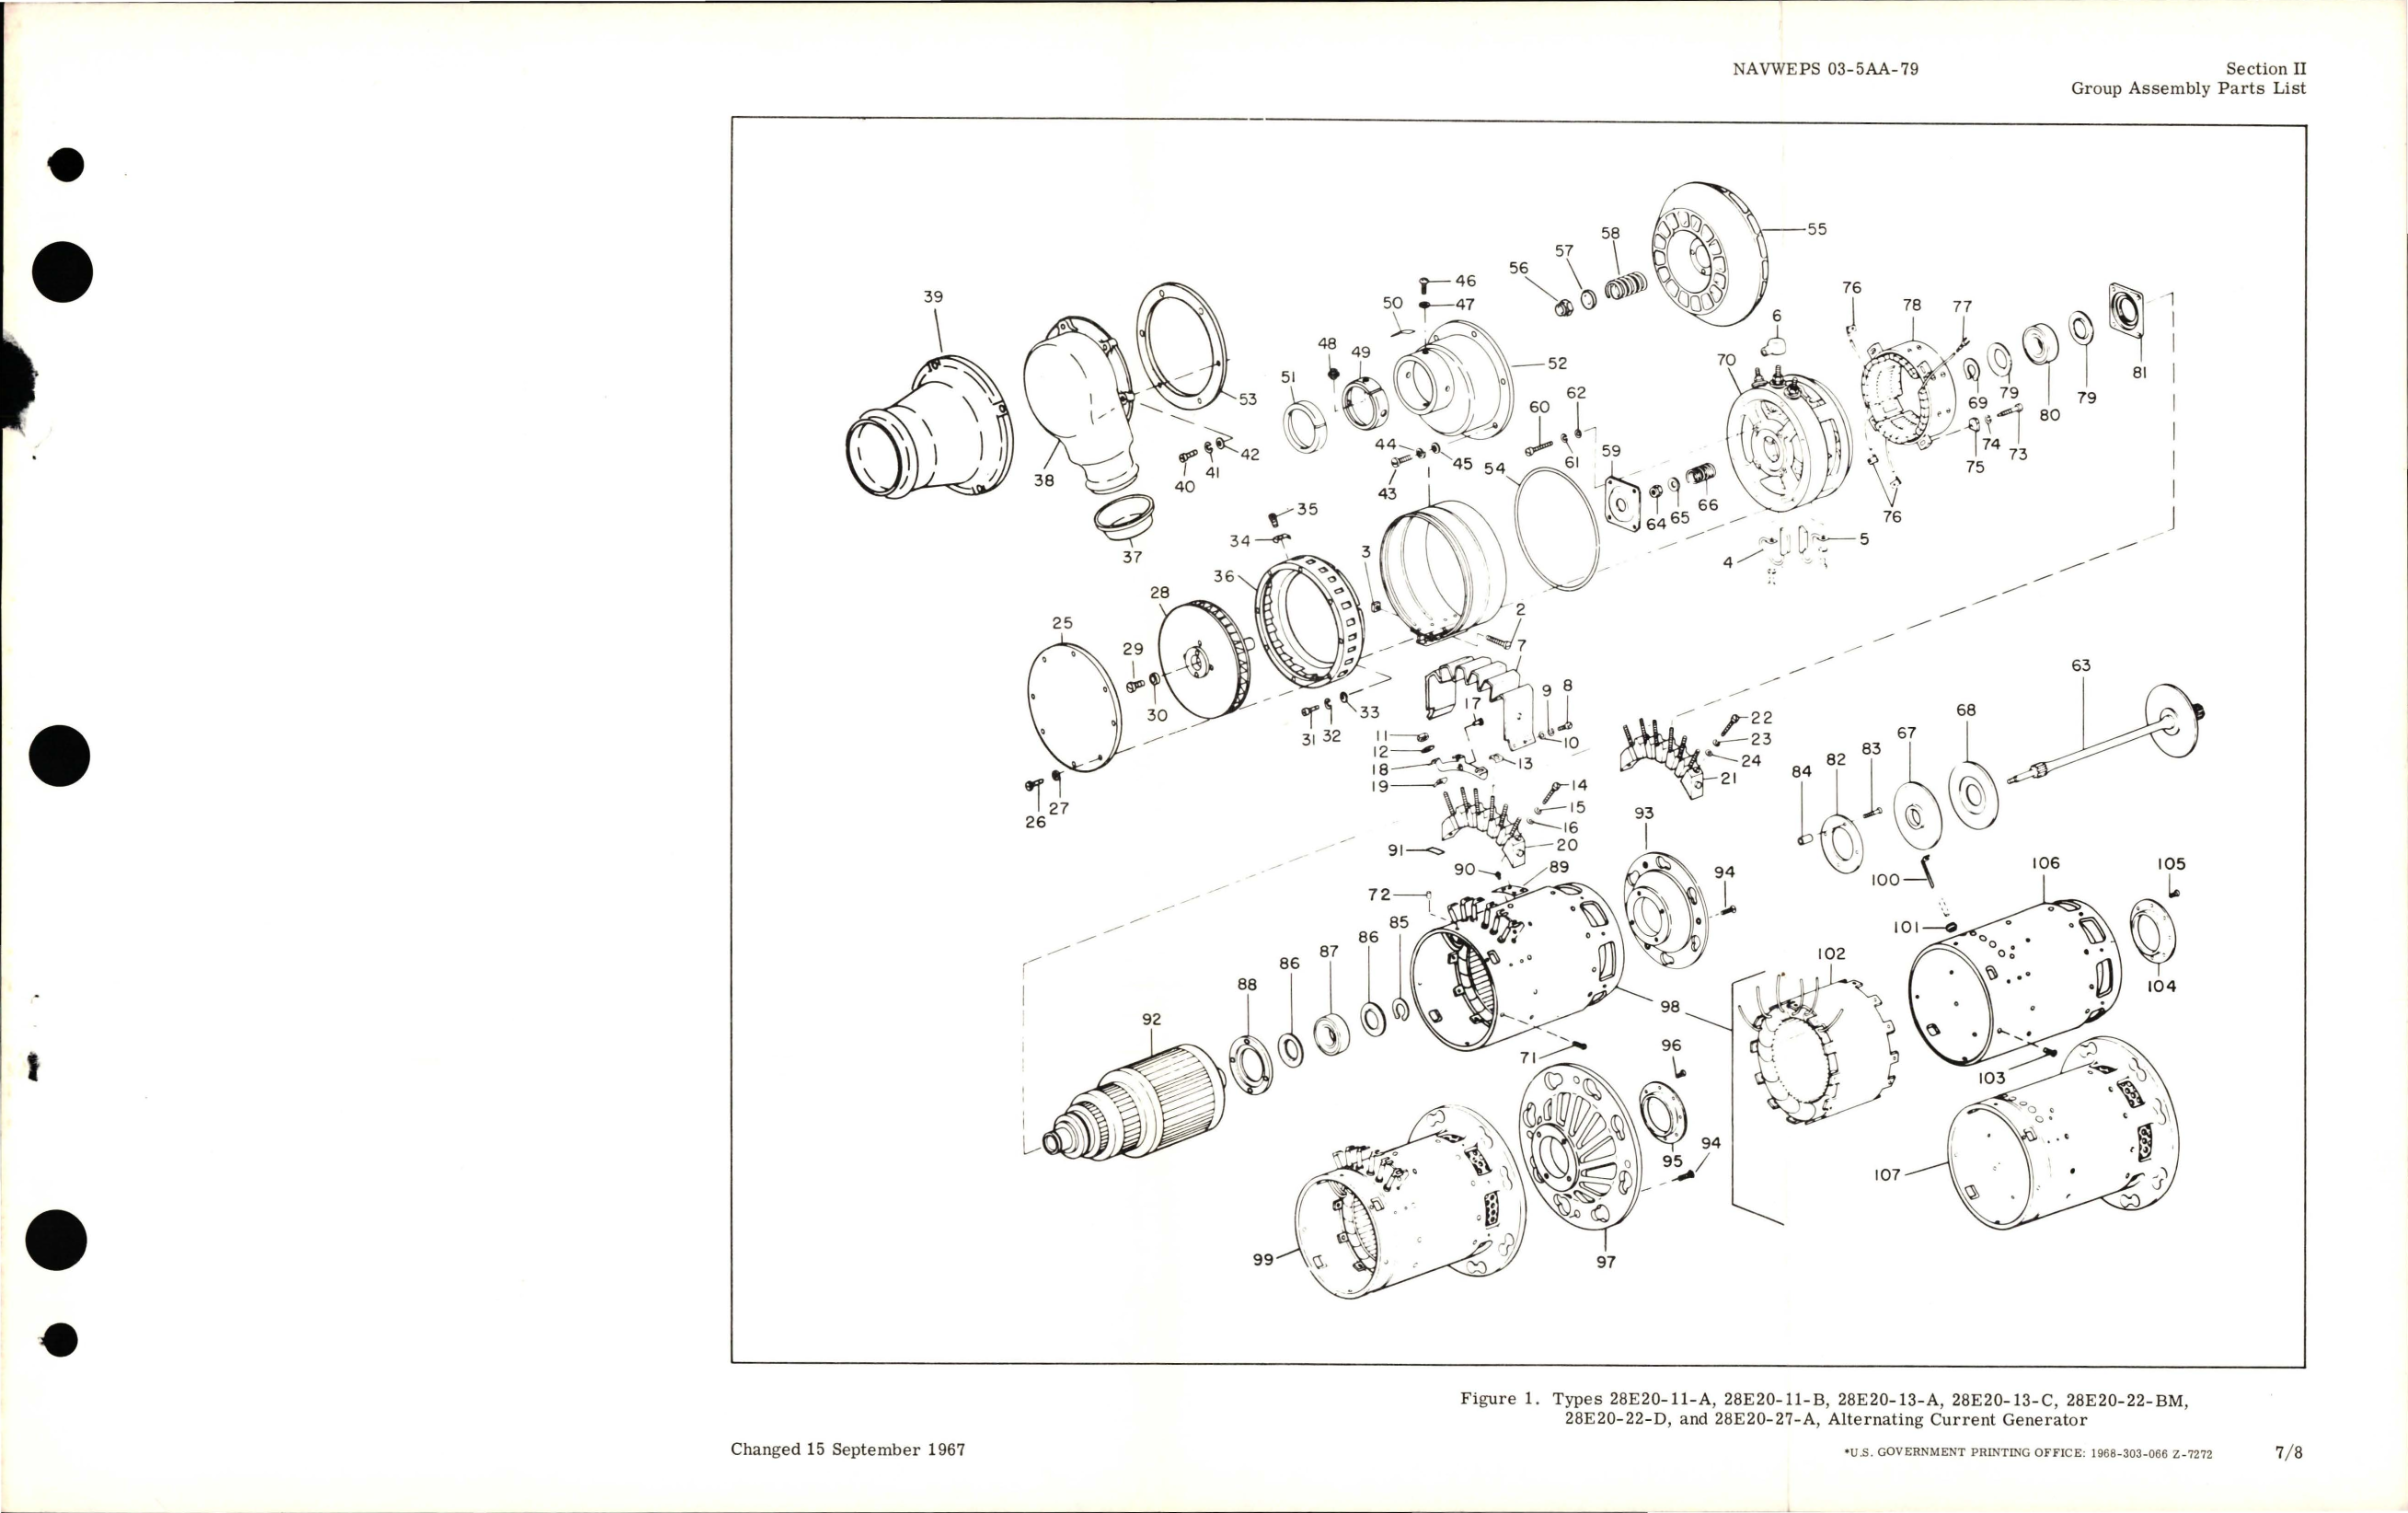 Sample page 9 from AirCorps Library document: Illustrated Parts Breakdown for Alternating Current Generator 